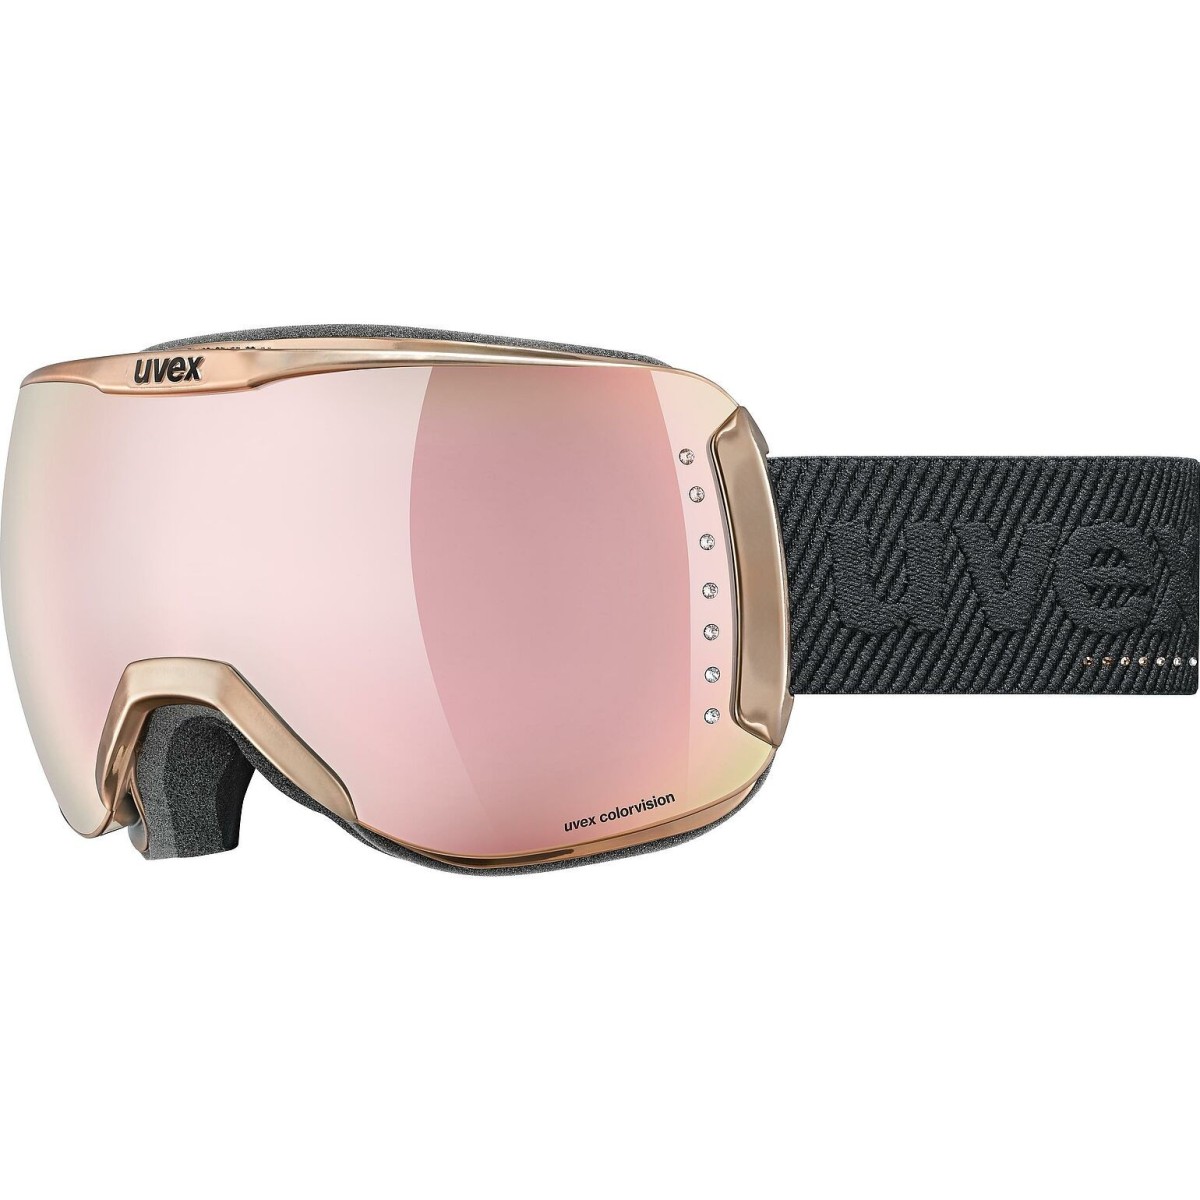 UVEX ski goggles DH 2100 WE GLAMOUR